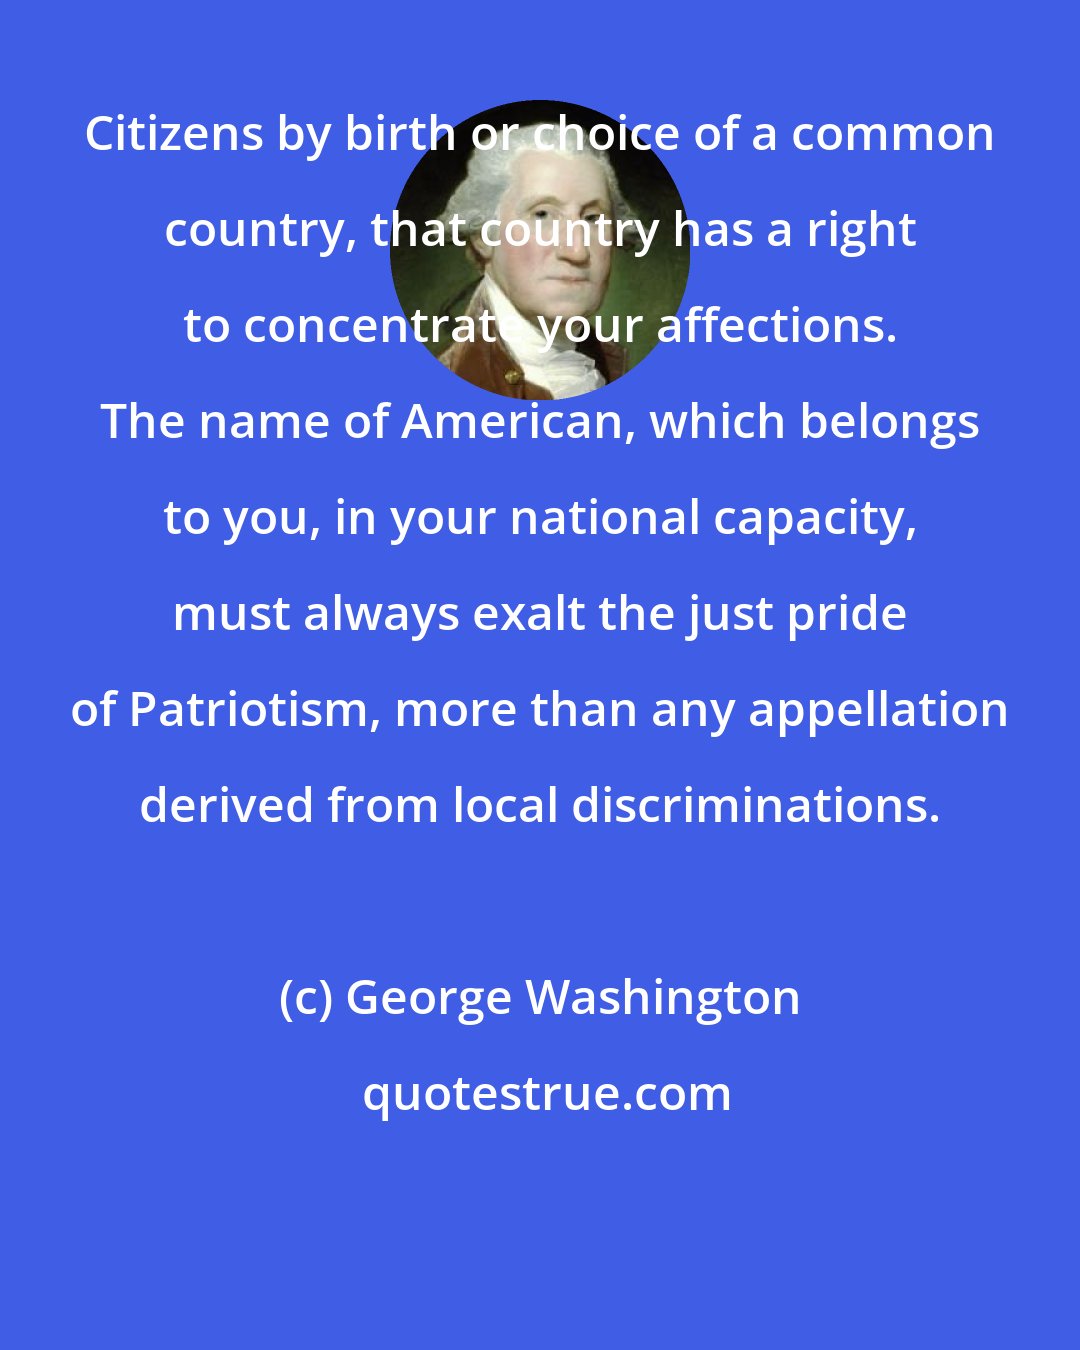 George Washington: Citizens by birth or choice of a common country, that country has a right to concentrate your affections. The name of American, which belongs to you, in your national capacity, must always exalt the just pride of Patriotism, more than any appellation derived from local discriminations.